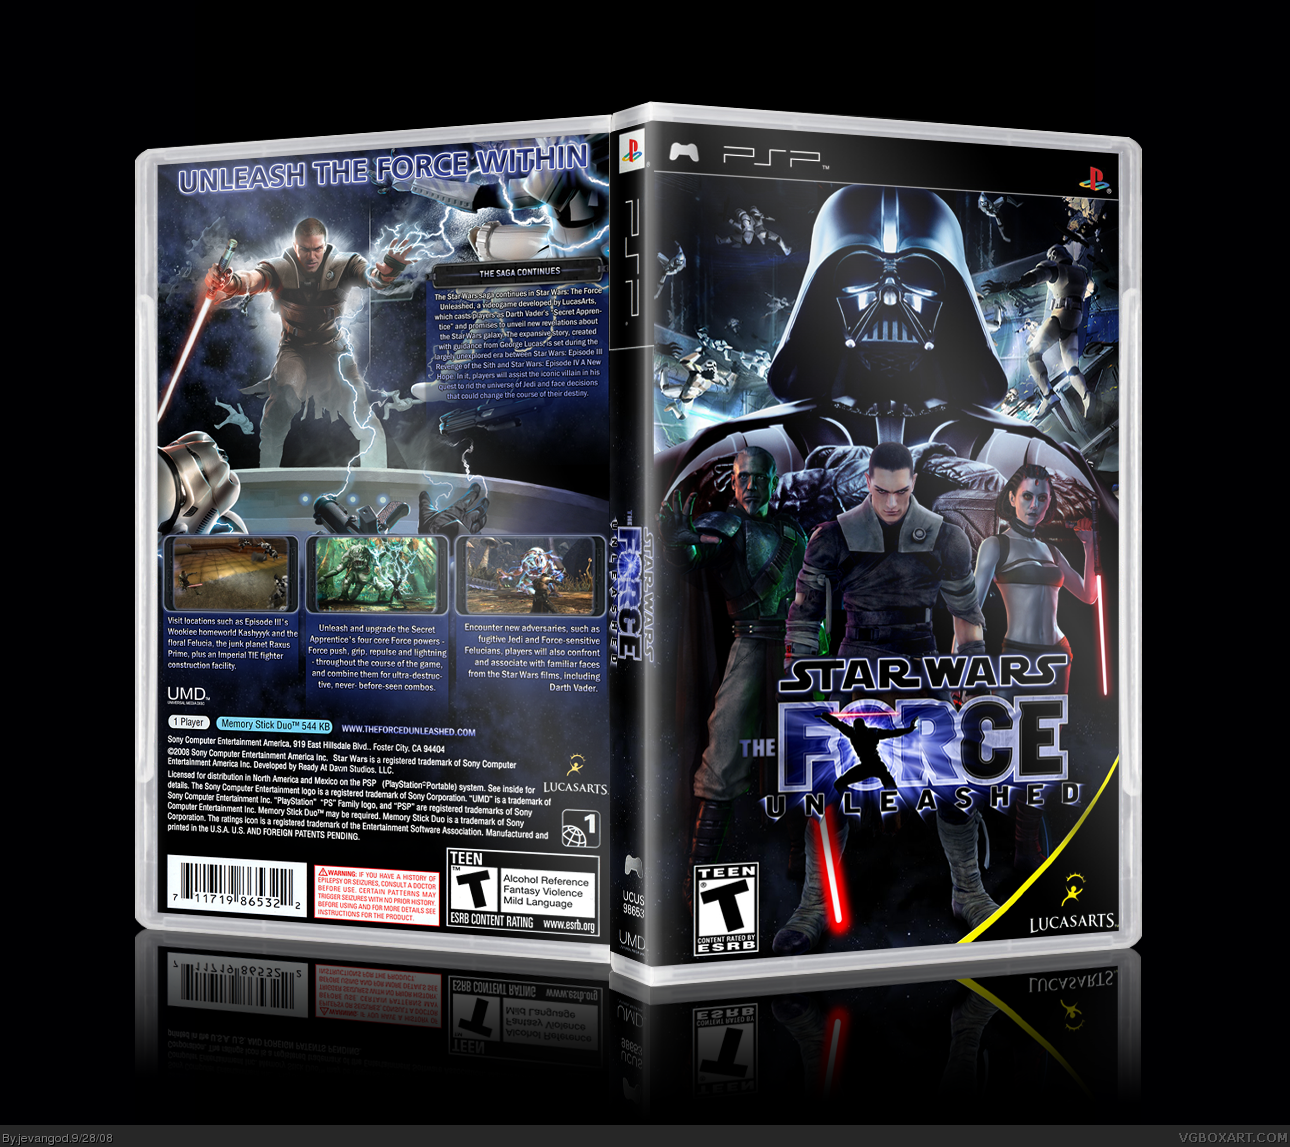 Star Wars: The Forced Unleashed box cover